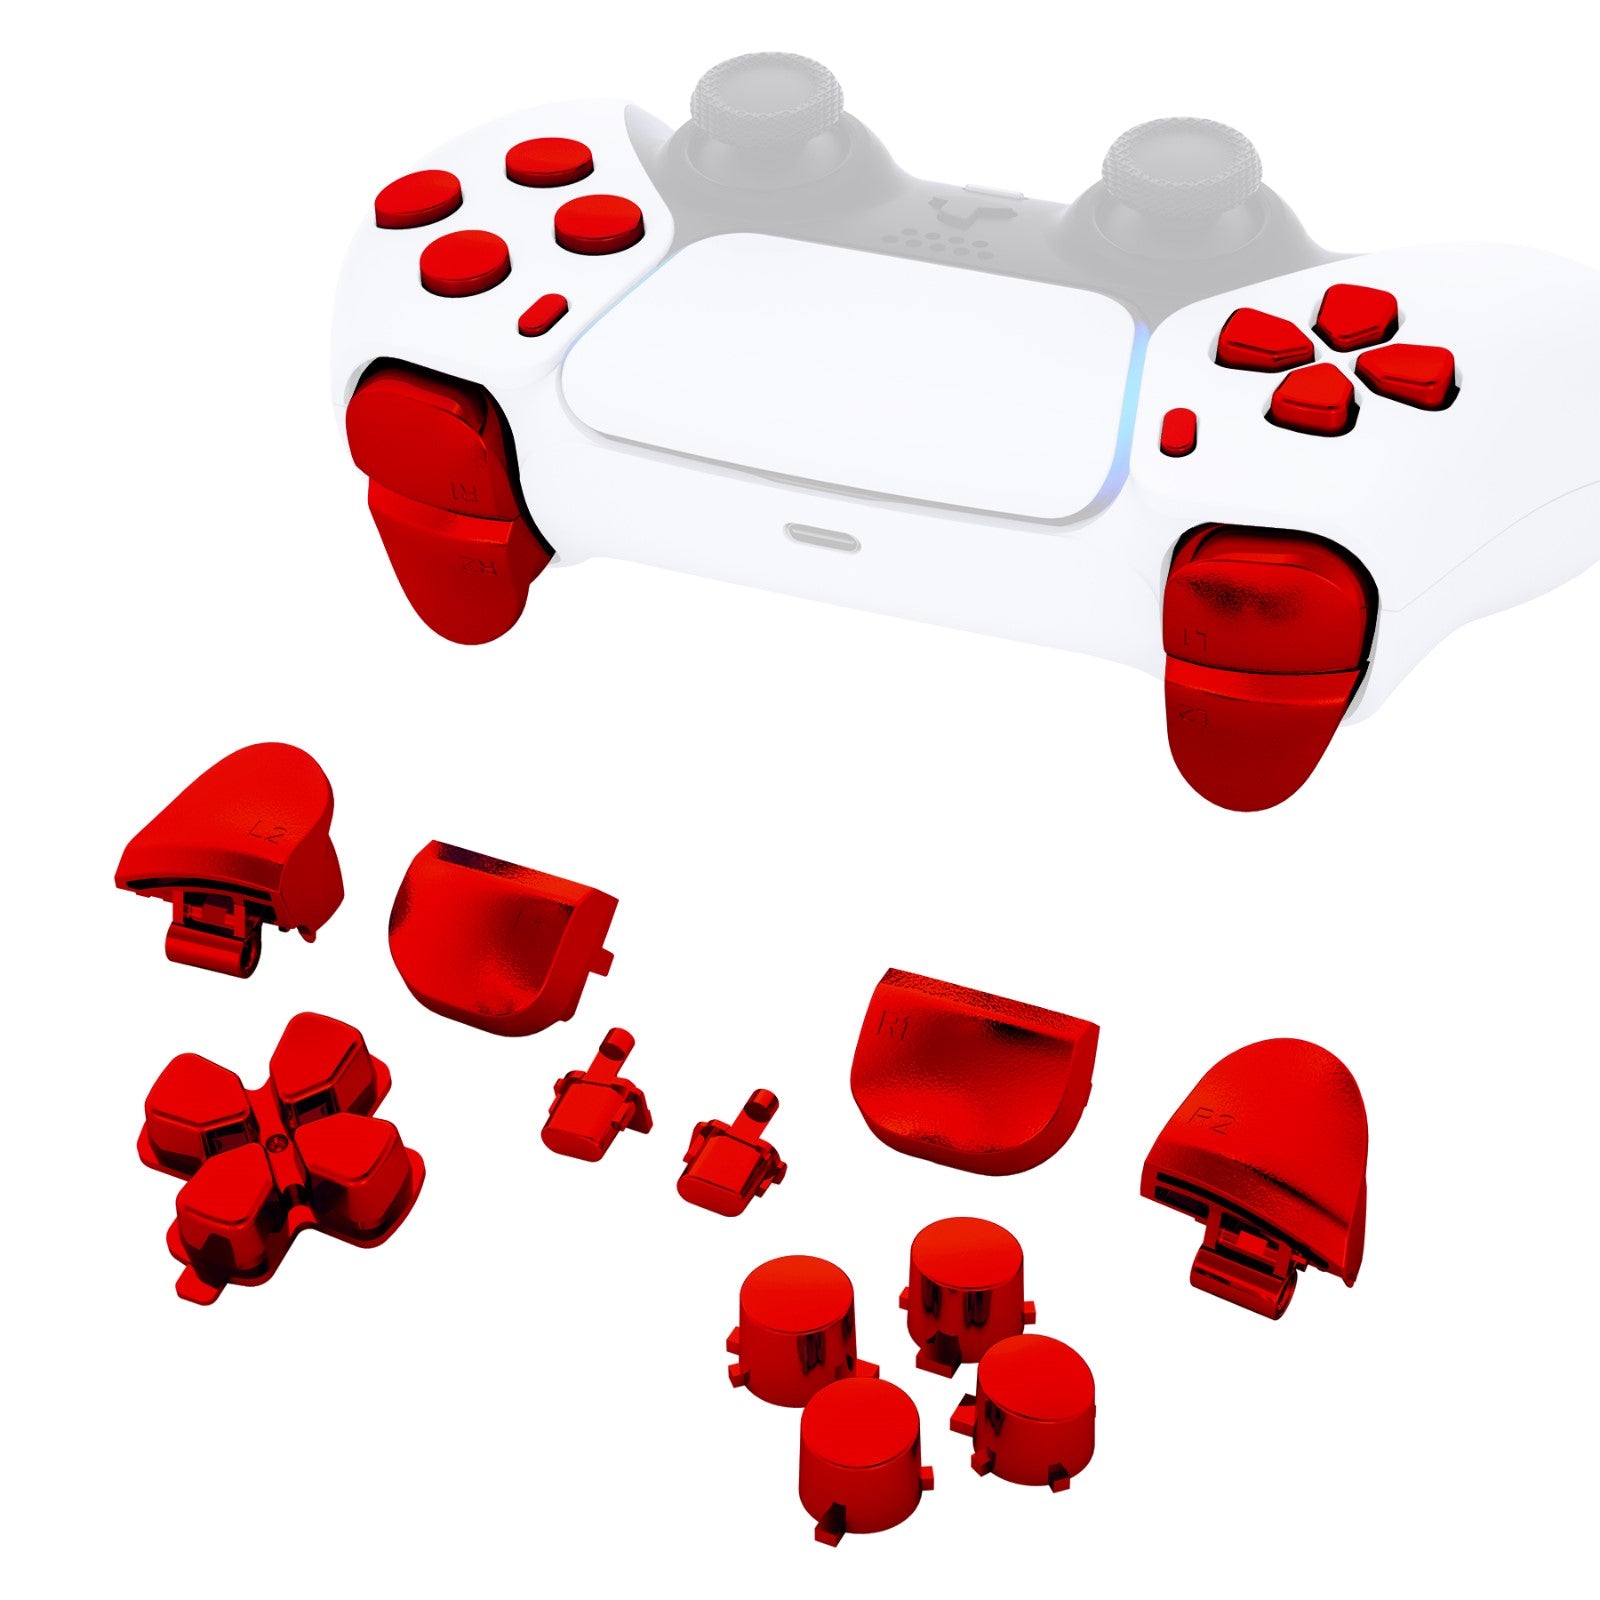 eXtremeRate Retail Replacement D-pad R1 L1 R2 L2 Triggers Share Options Face Buttons, Chrome Red Full Set Buttons Compatible With ps5 Controller BDM-010 & BDM-020 - JPF2003G2